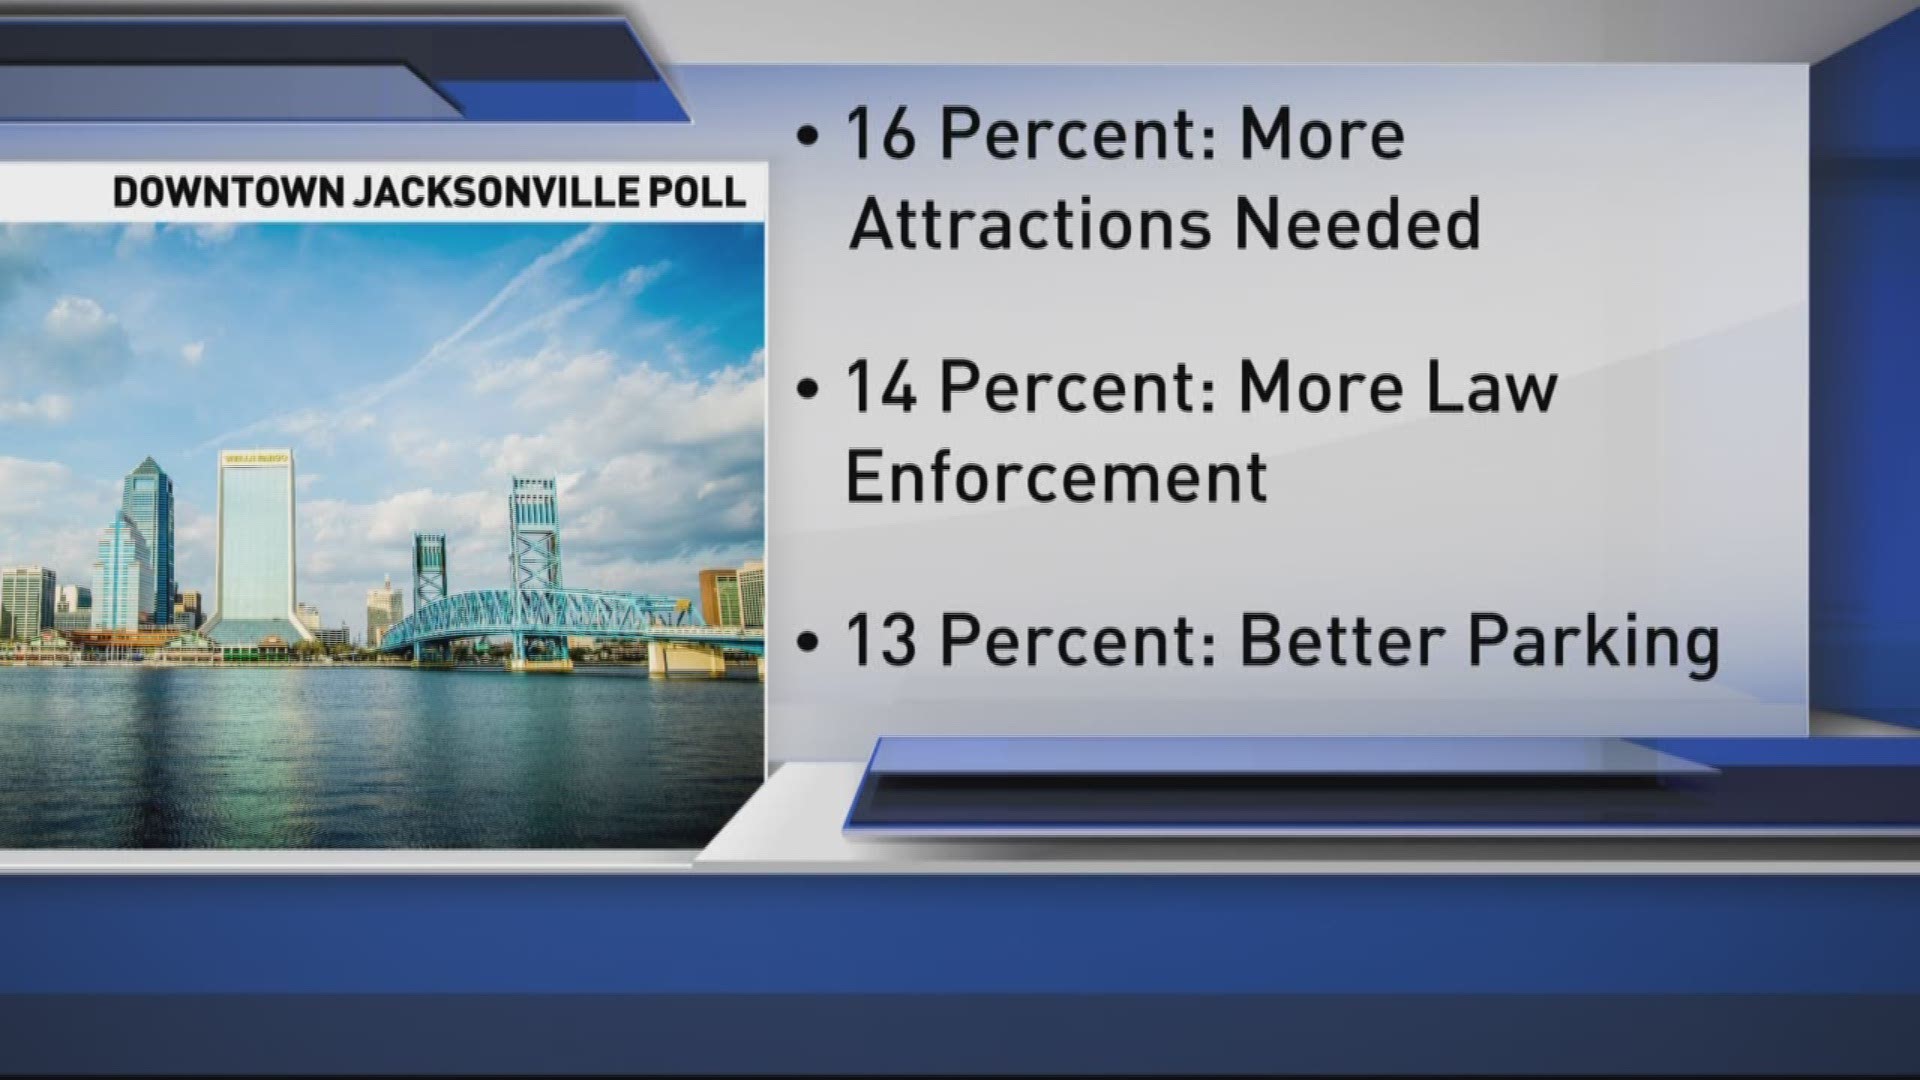 Only 37% of local residents believe downtown is getting better.